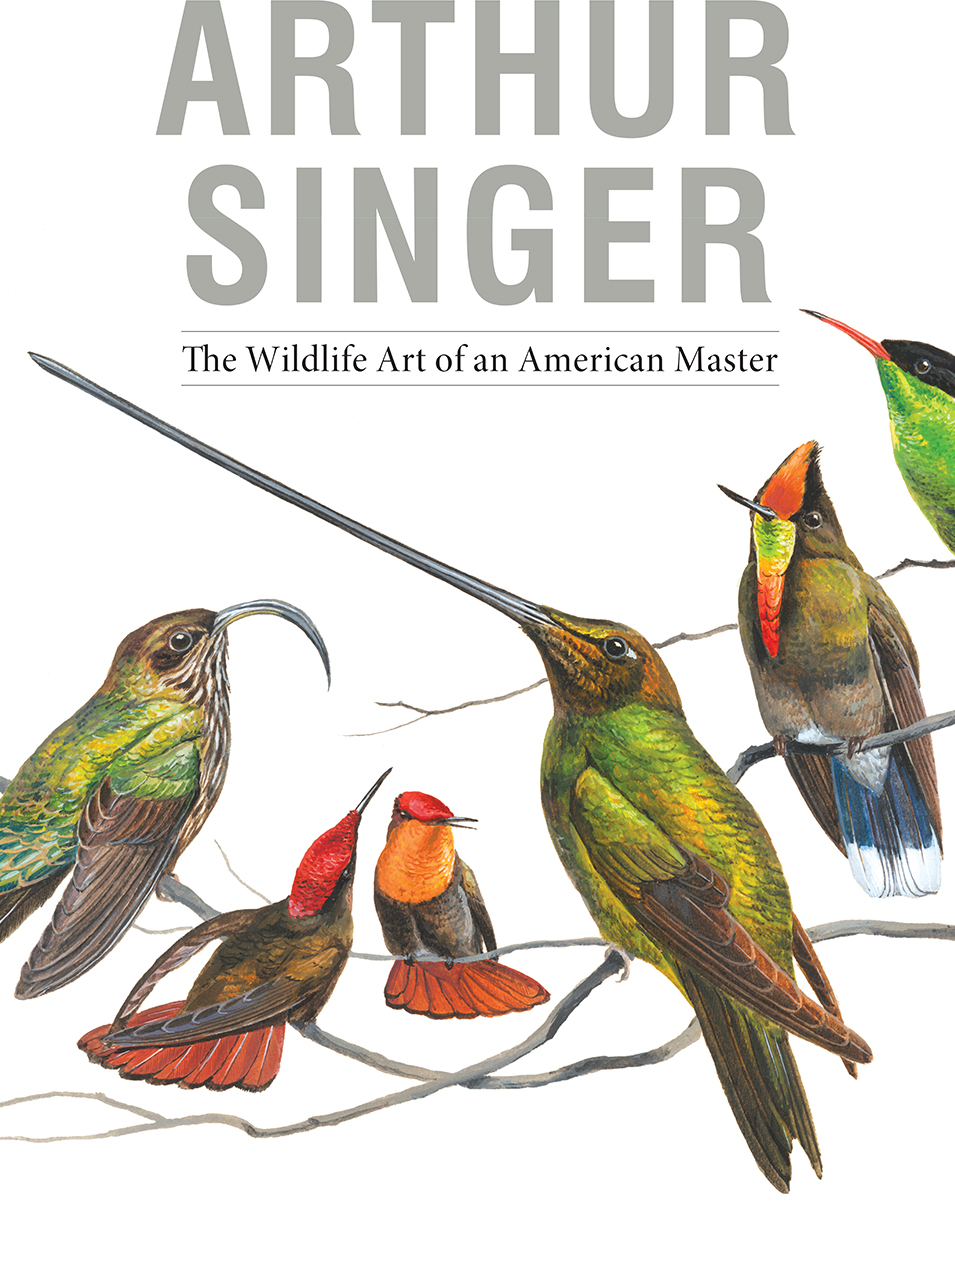 Book cover featuring many birds